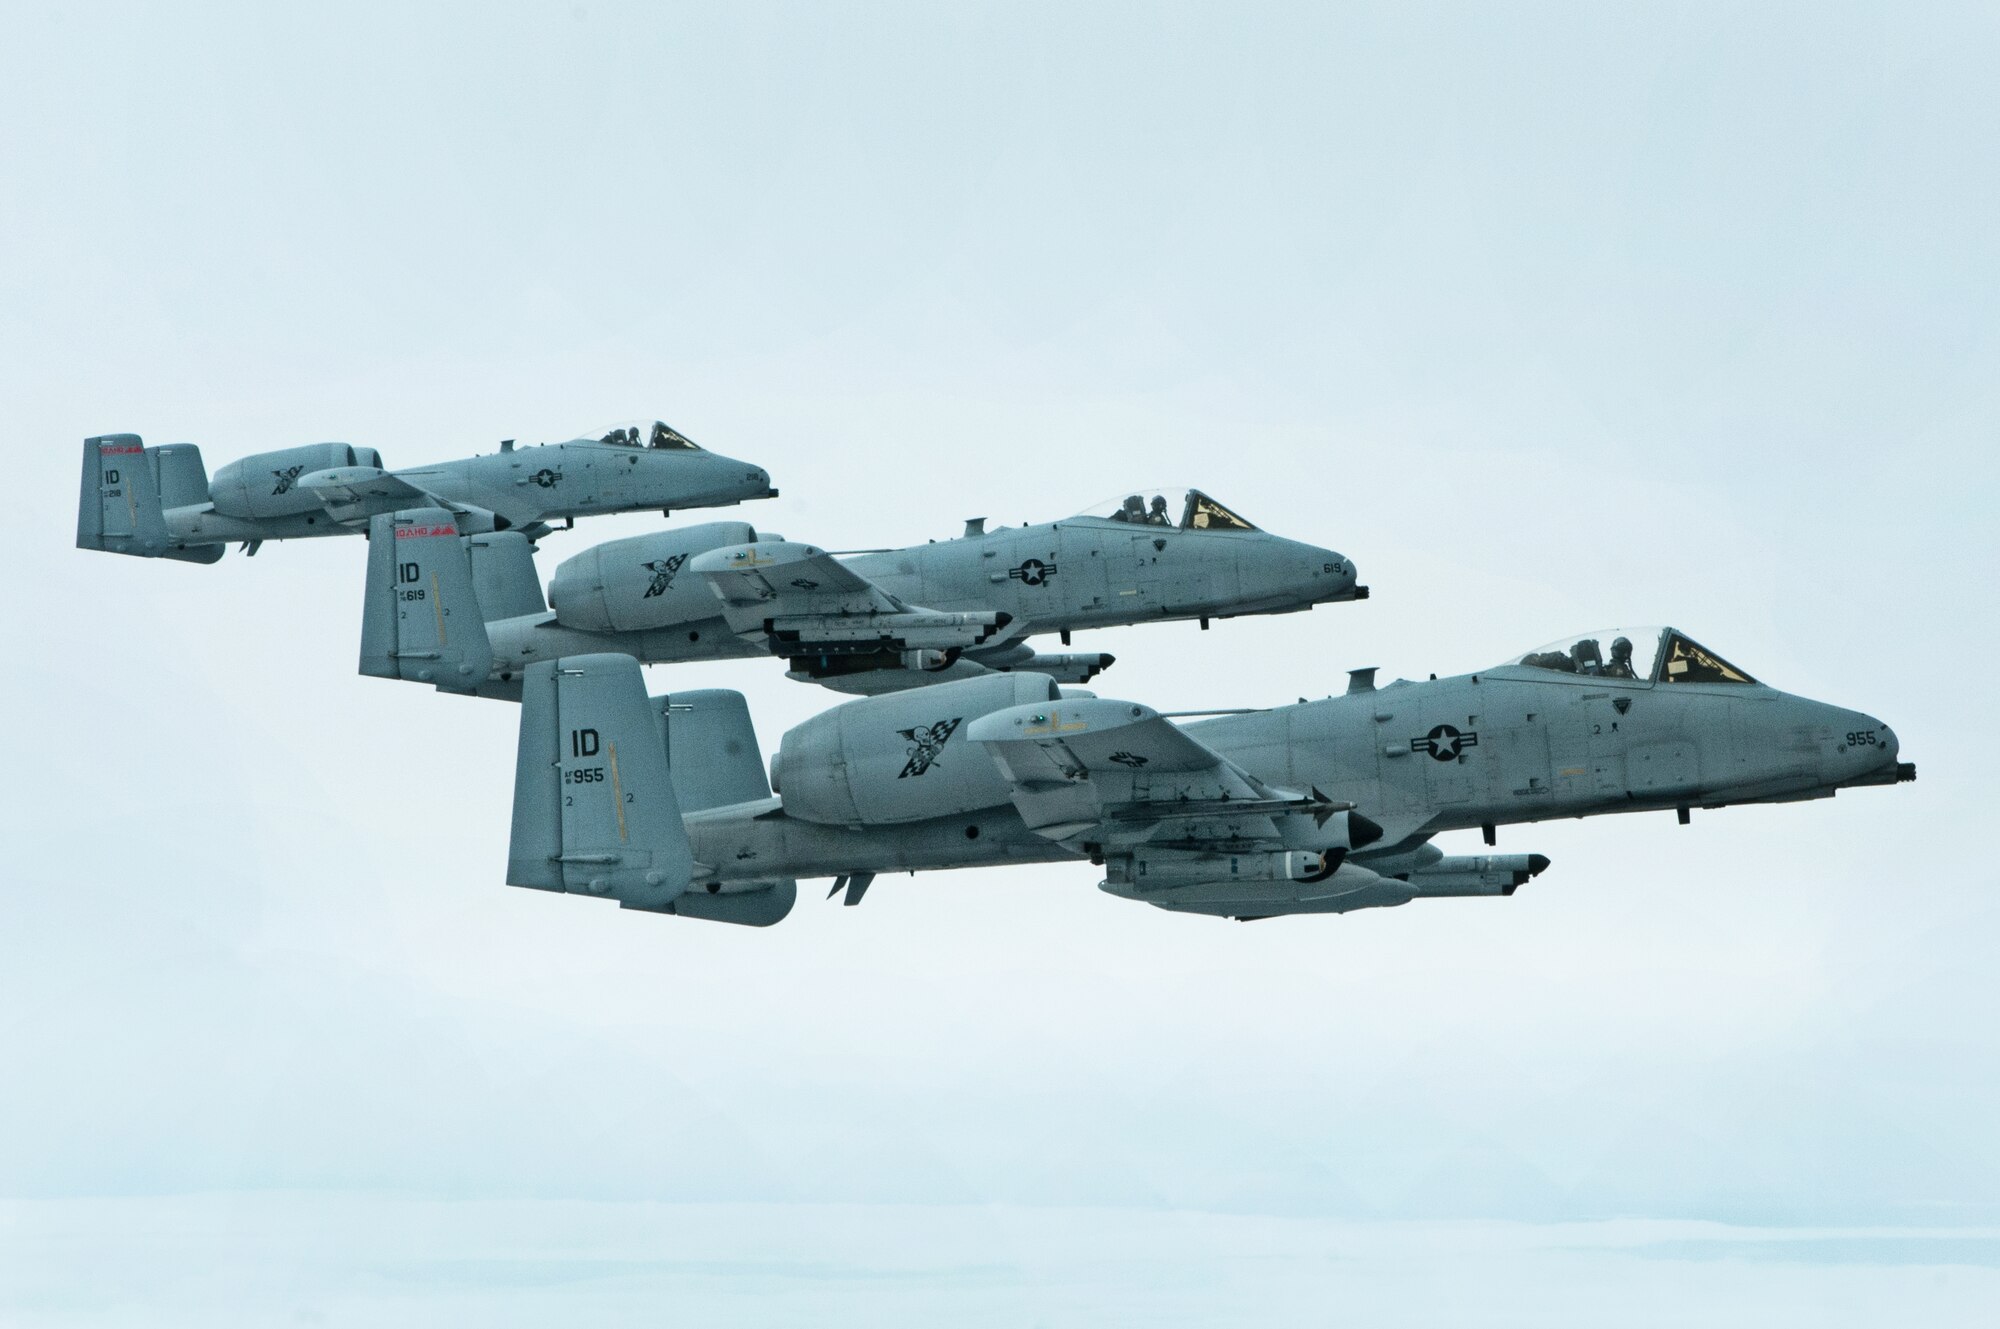 Capt. Casey Peasley, flying the lead aircraft, with 1st Lt. Micha Stoddard, followed by Maj. Jay Labrum, from the 190th Fighter Squadron, Boise, Idaho, fly the mighty A-10 Thunderbolt II "Warthog" in an echelon formation on March 26. The three aircraft fly next to a KC-135 Stratotanker, for refueling enroute from the air combat exercise Green Flag East, Barksdale Air Force Base, La. (Air National Guard photo by Master Sgt. Becky Vanshur)


